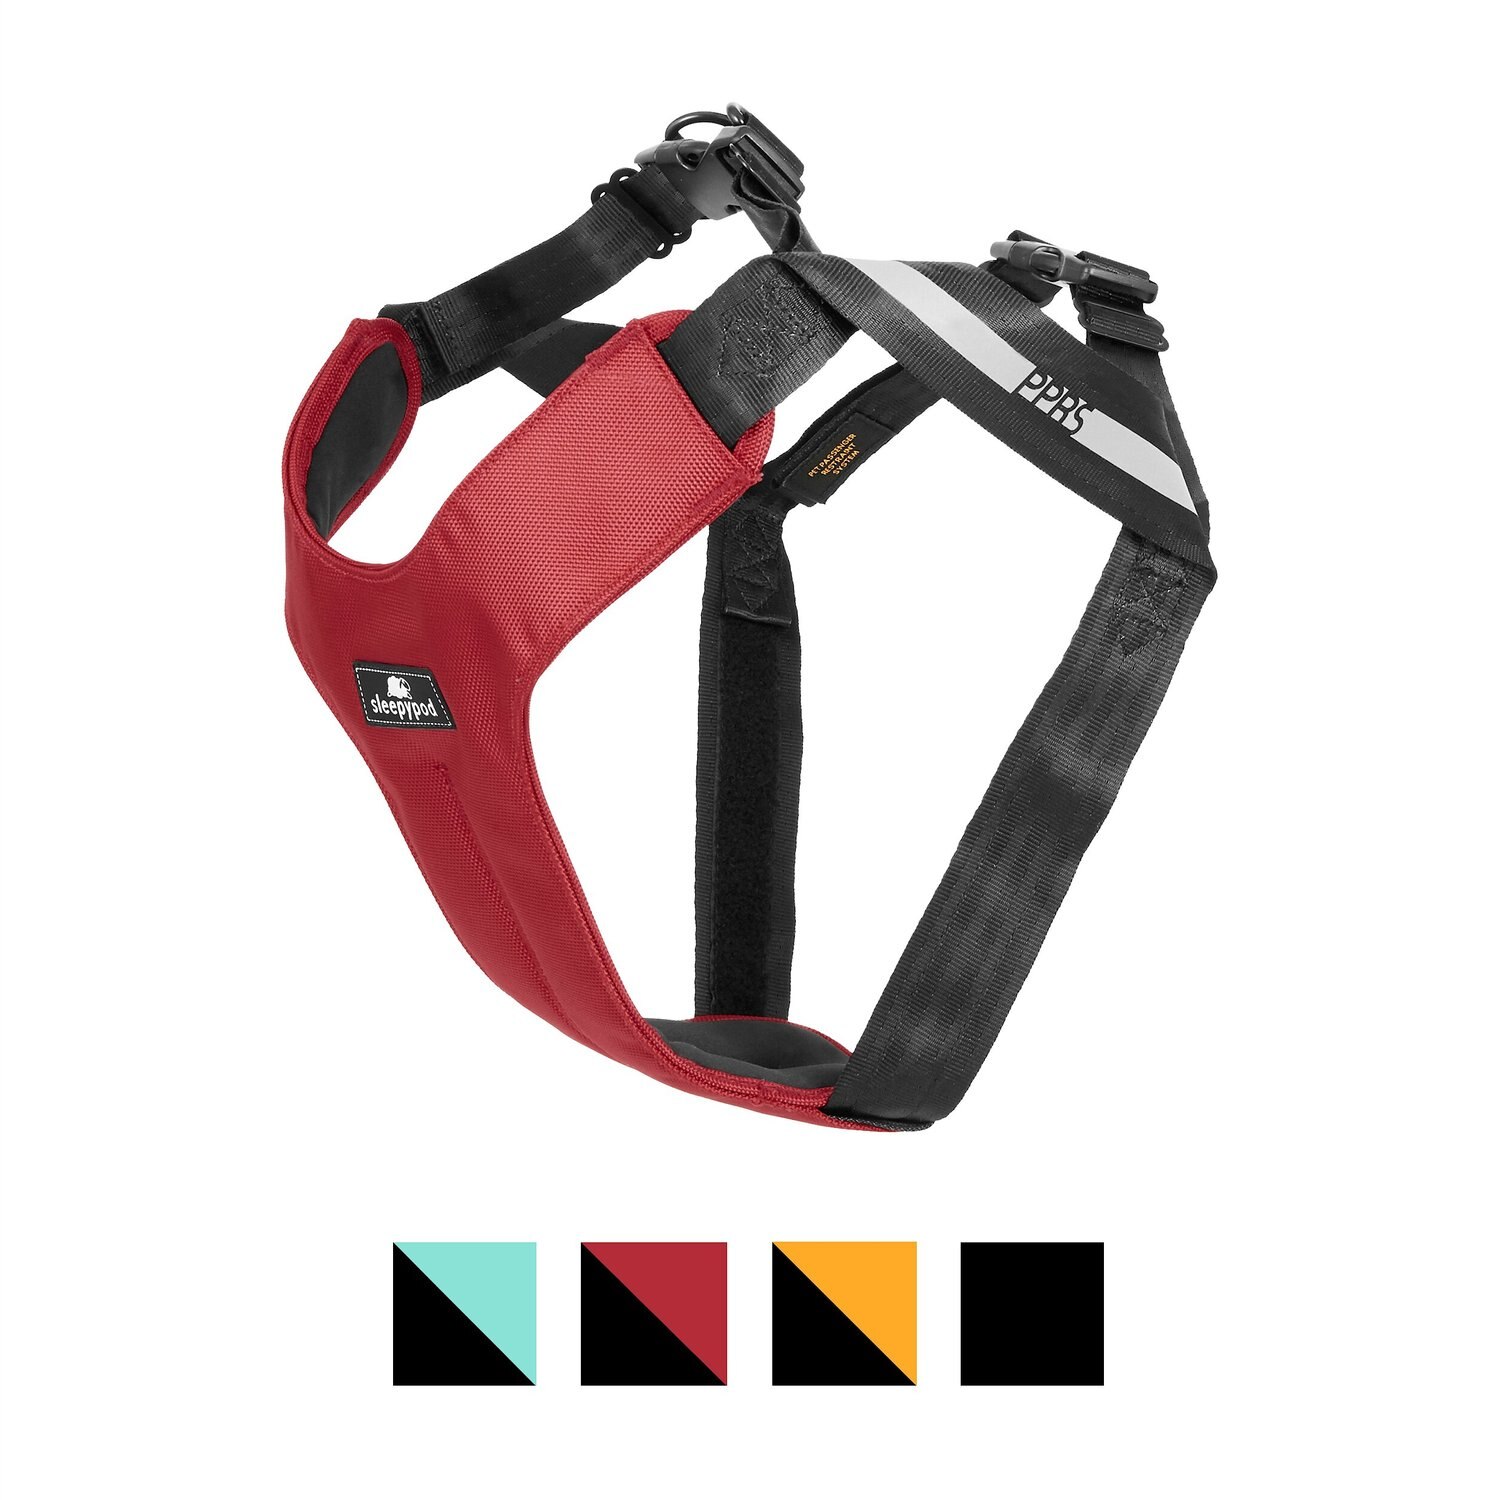 Sleepypod ClickIt TERRAIN Dog Safety Harness M, Strawberry Red Safest Crash-Tested Car Harness